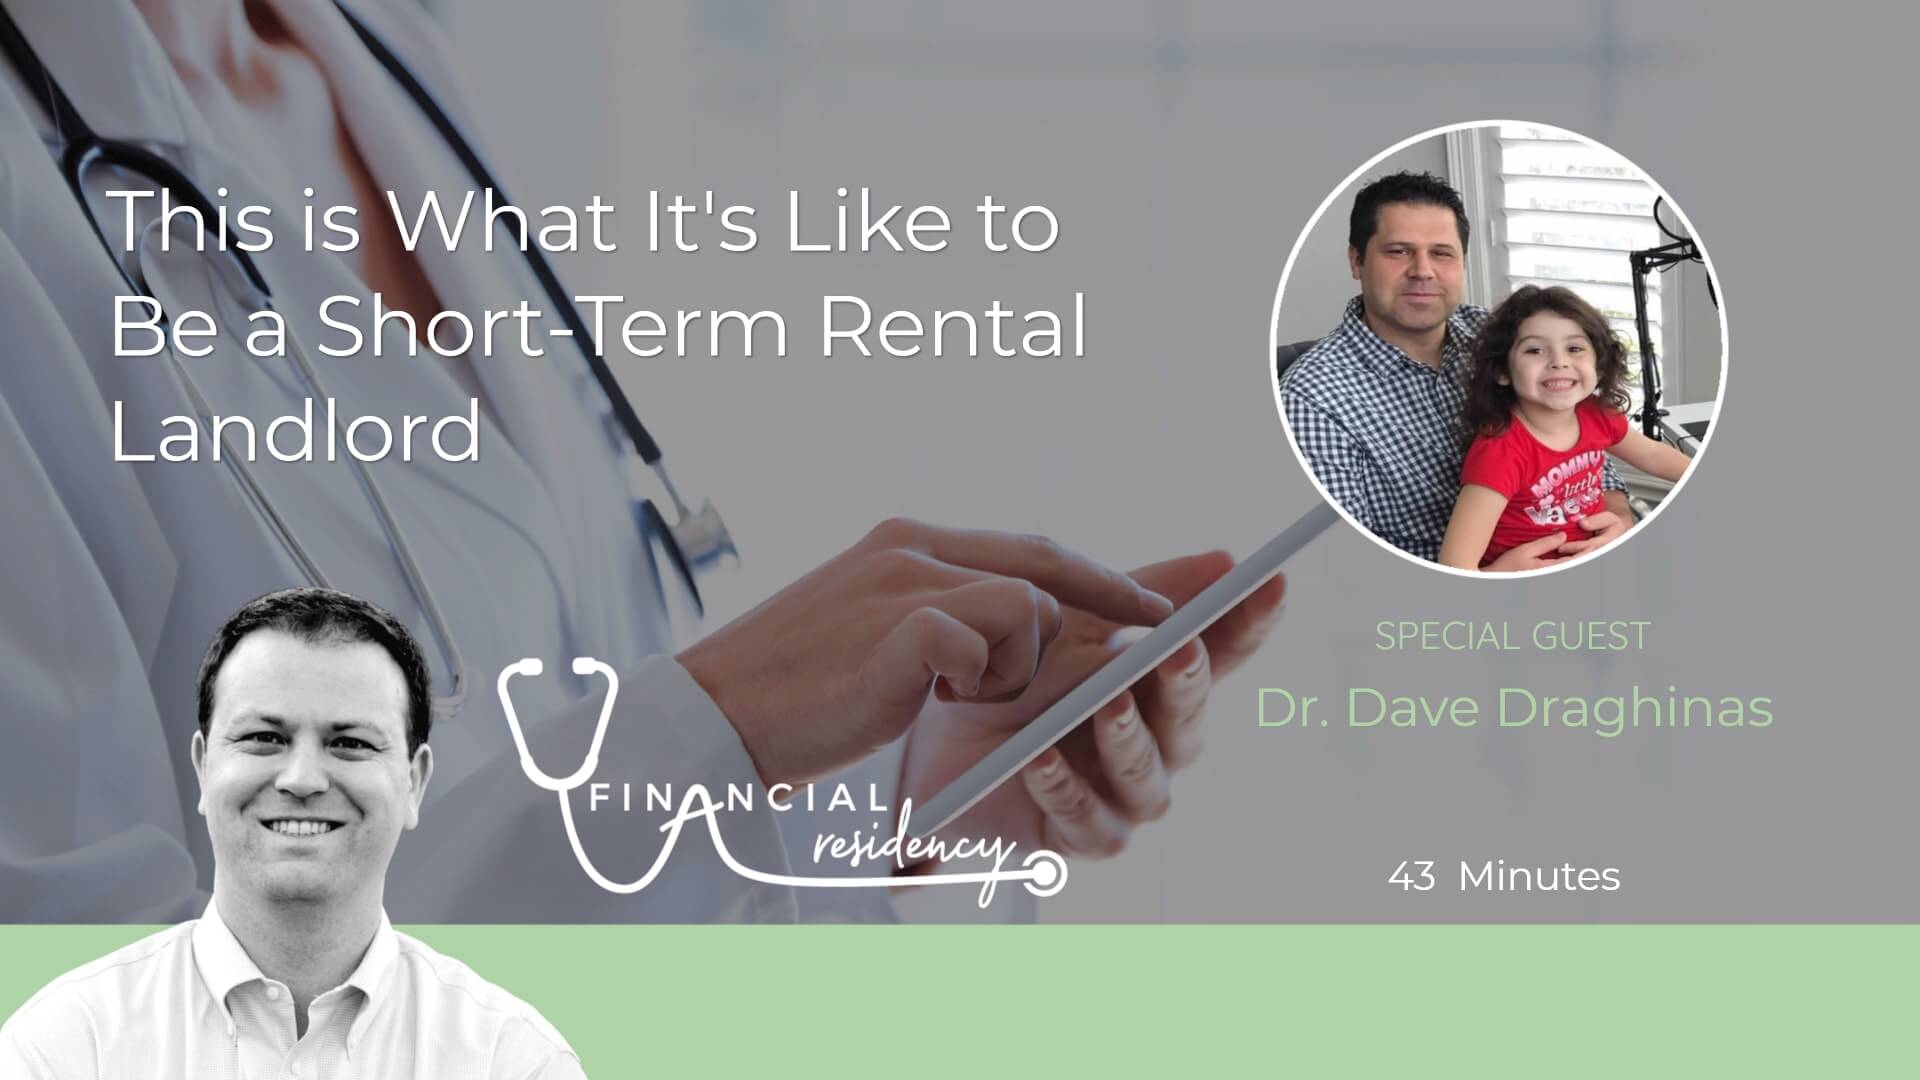 Airbnb, Short-Term Rental Landlord, Passive Income Becomes Active Income, Real Estate for Physicians